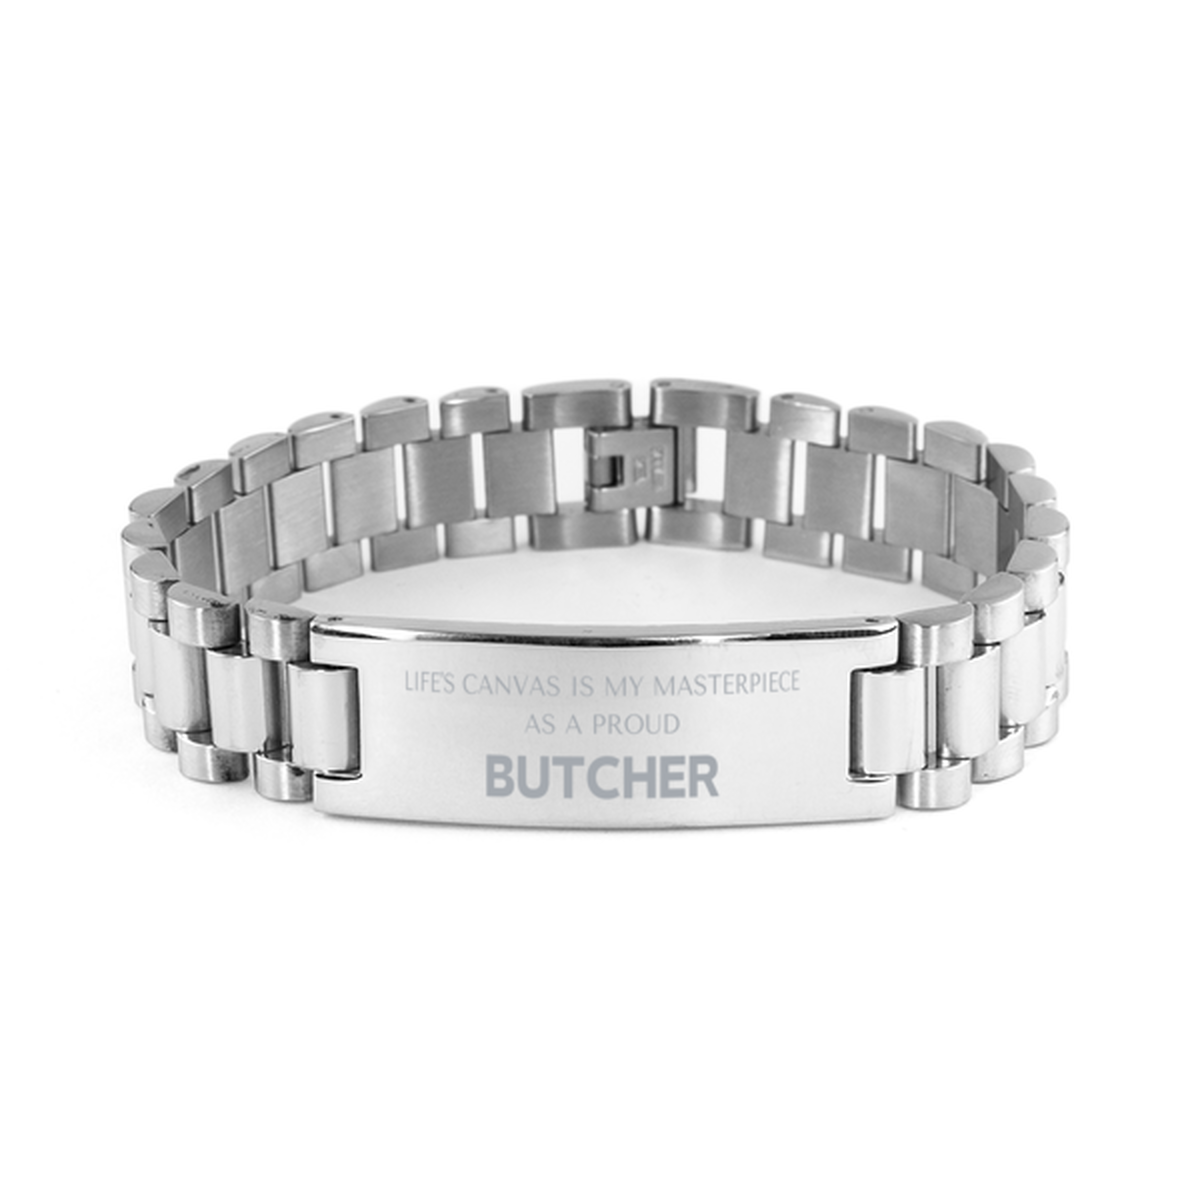 Proud Butcher Gifts, Life's canvas is my masterpiece, Epic Birthday Christmas Unique Ladder Stainless Steel Bracelet For Butcher, Coworkers, Men, Women, Friends